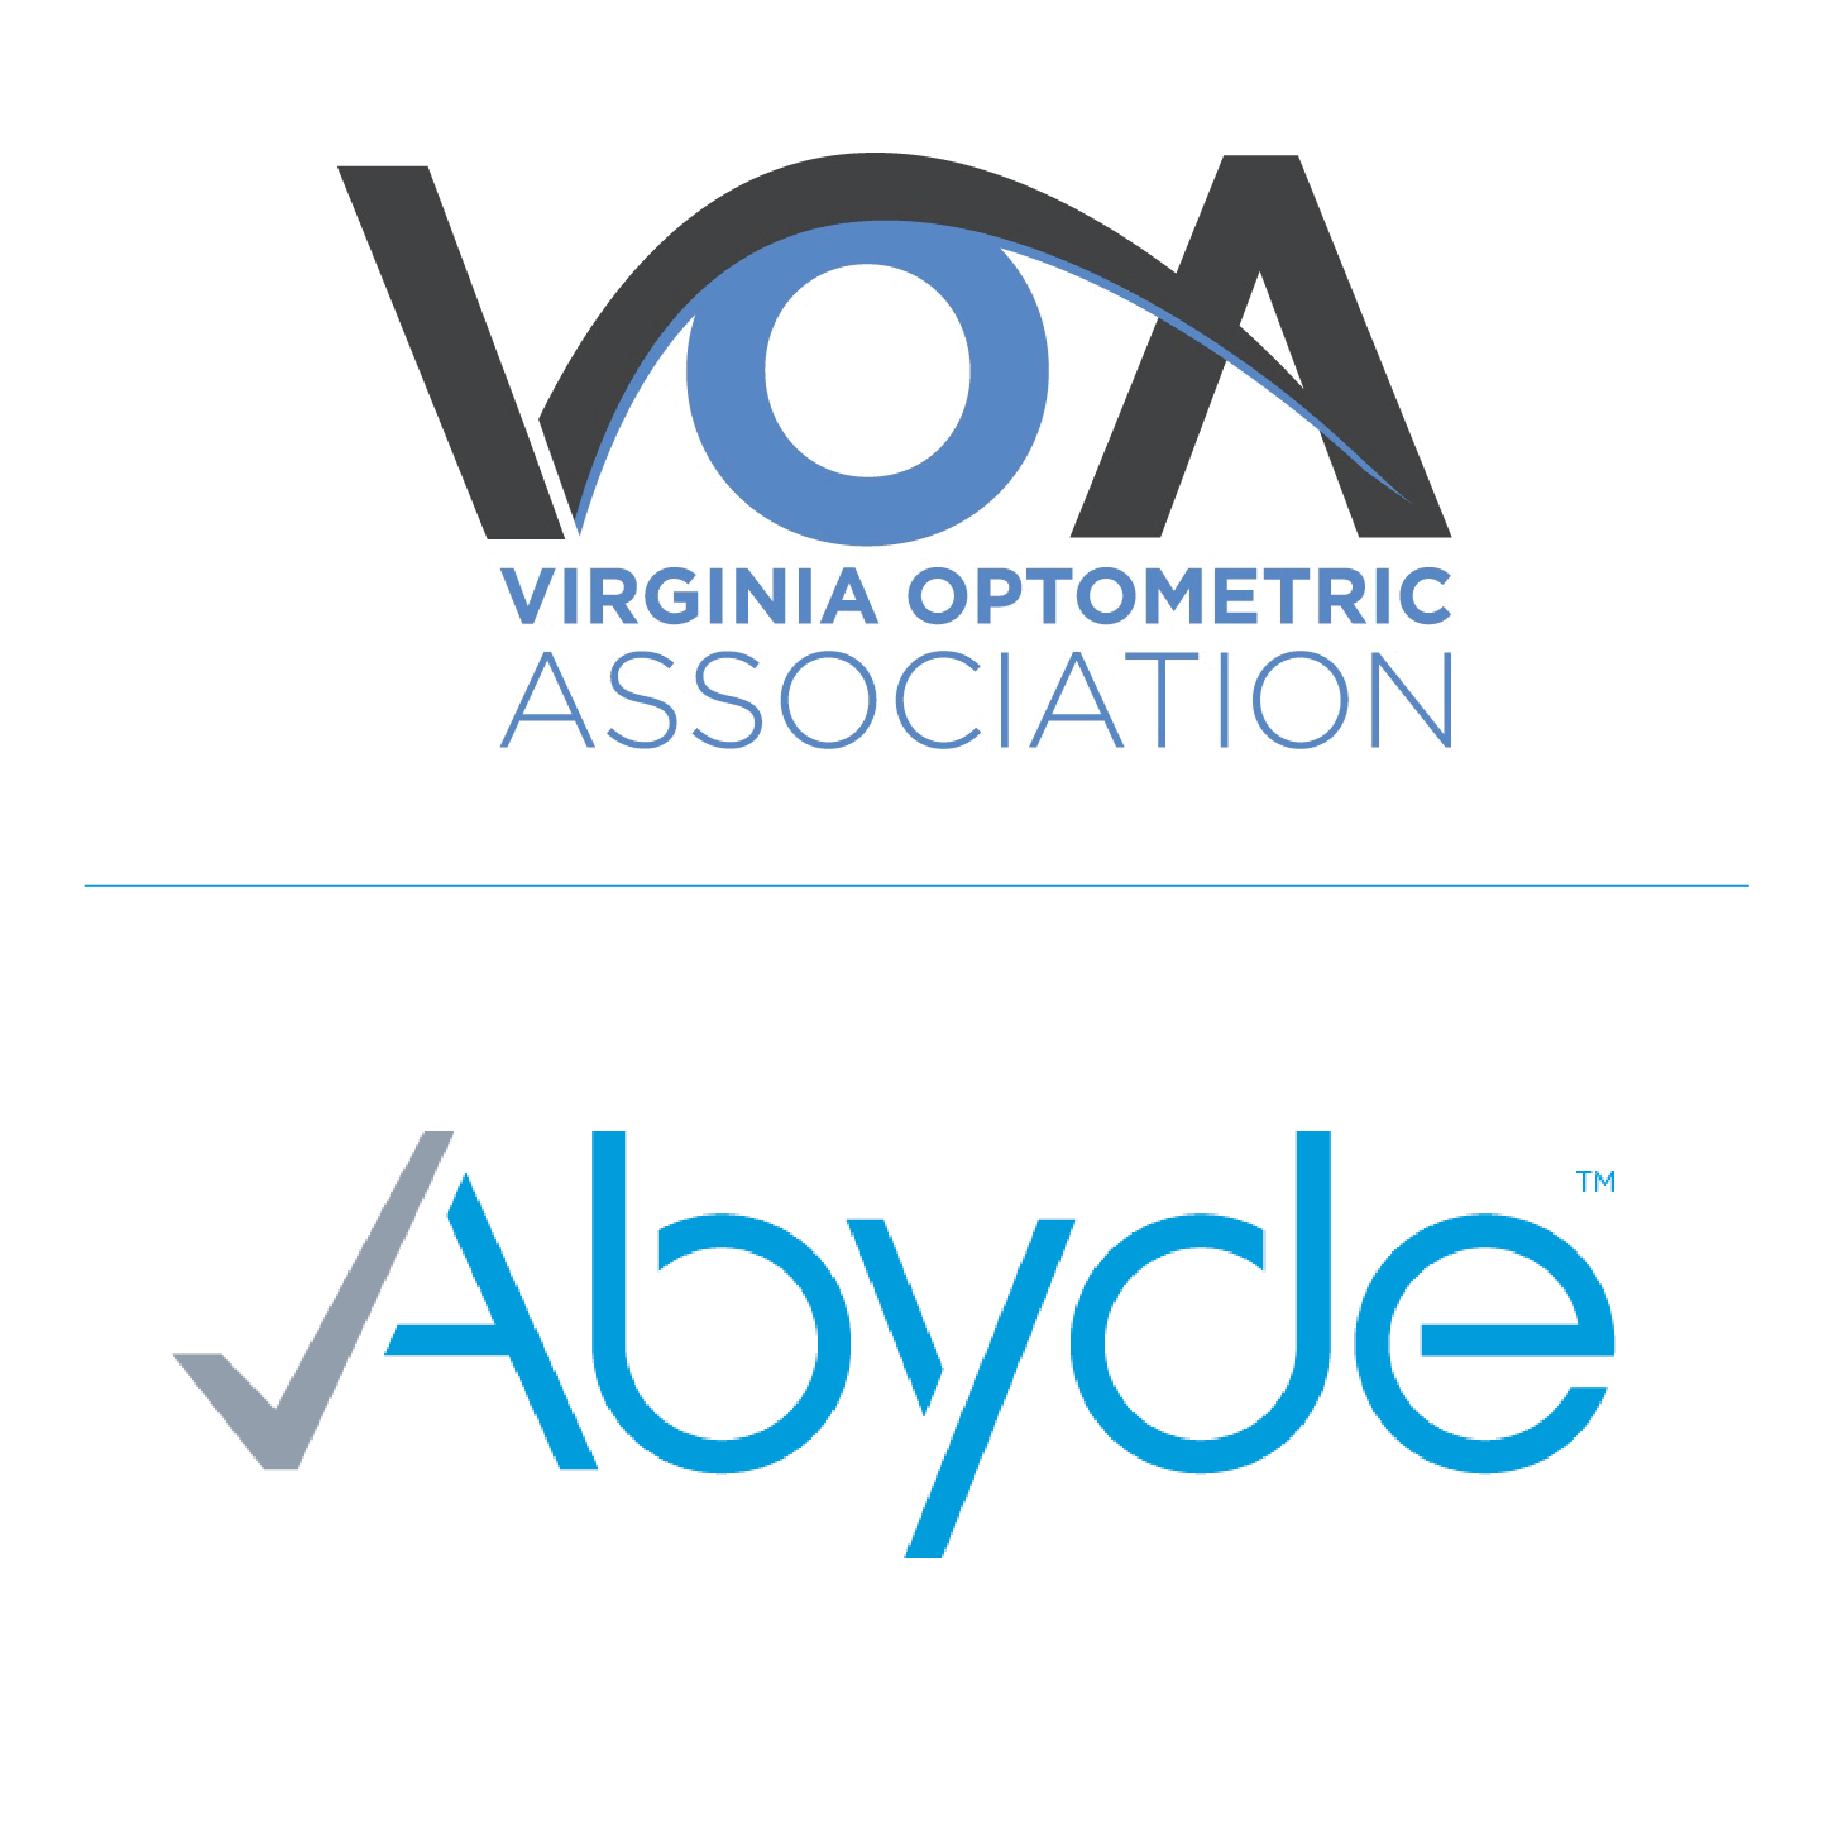 Virginia Optometric Association and Abyde partner to deliver HIPAA compliance to independent eye care professionals